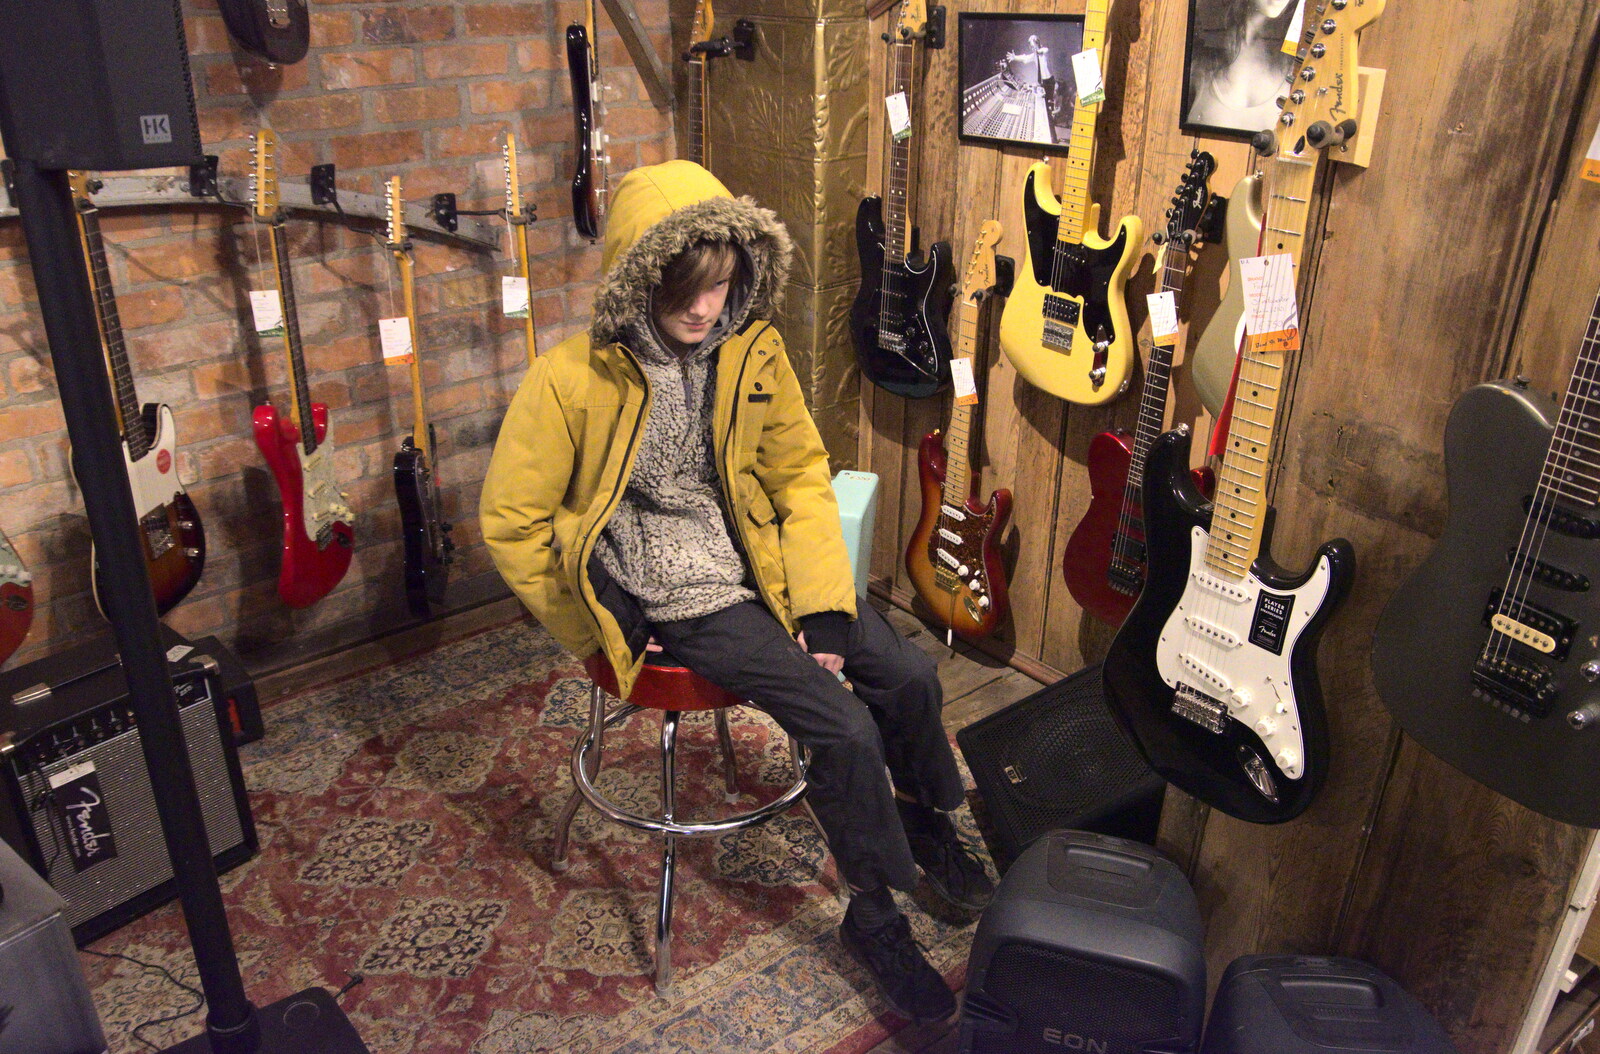 Blackrock North and Newgrange, County Louth, Ireland - 16th February 2023: Harry tries the dum stool in the music shop